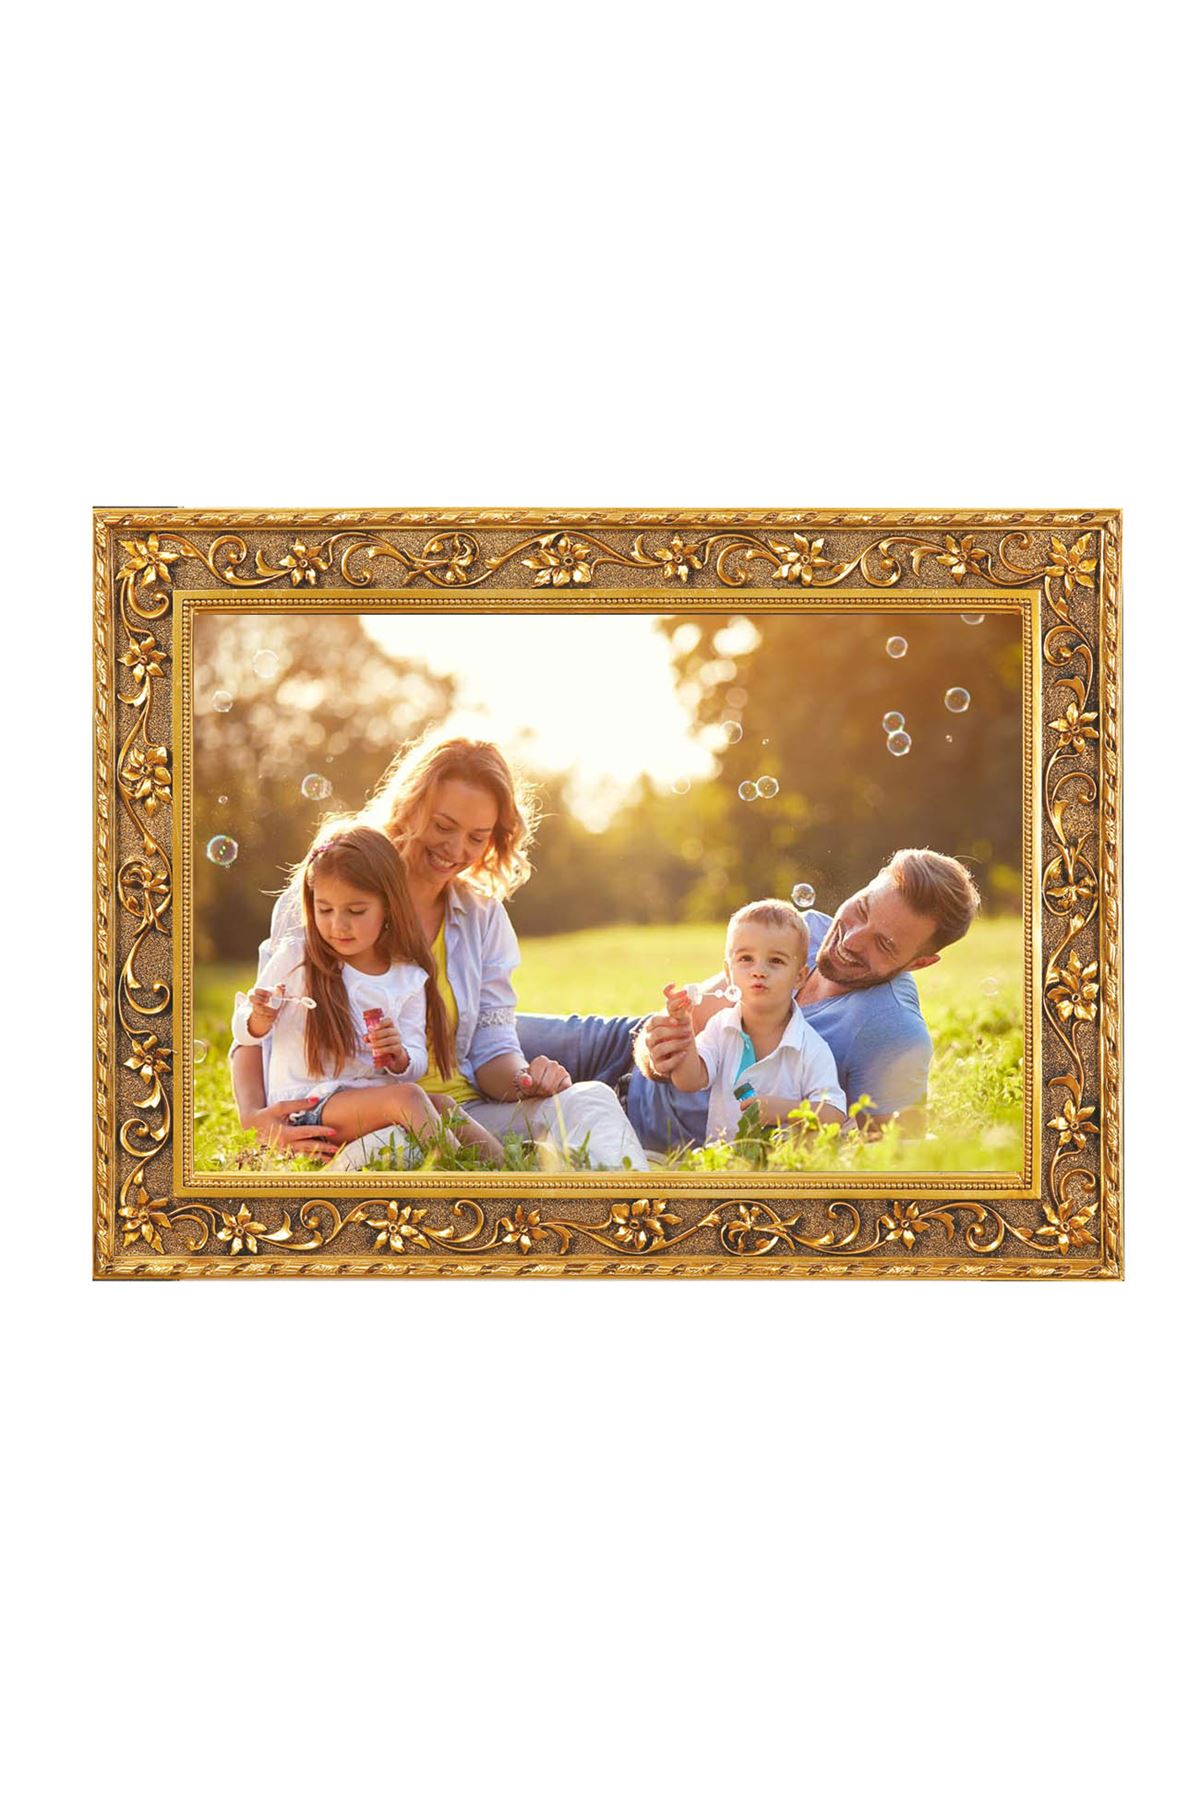 Personalized Golden Frame or Silver Frame Pictures